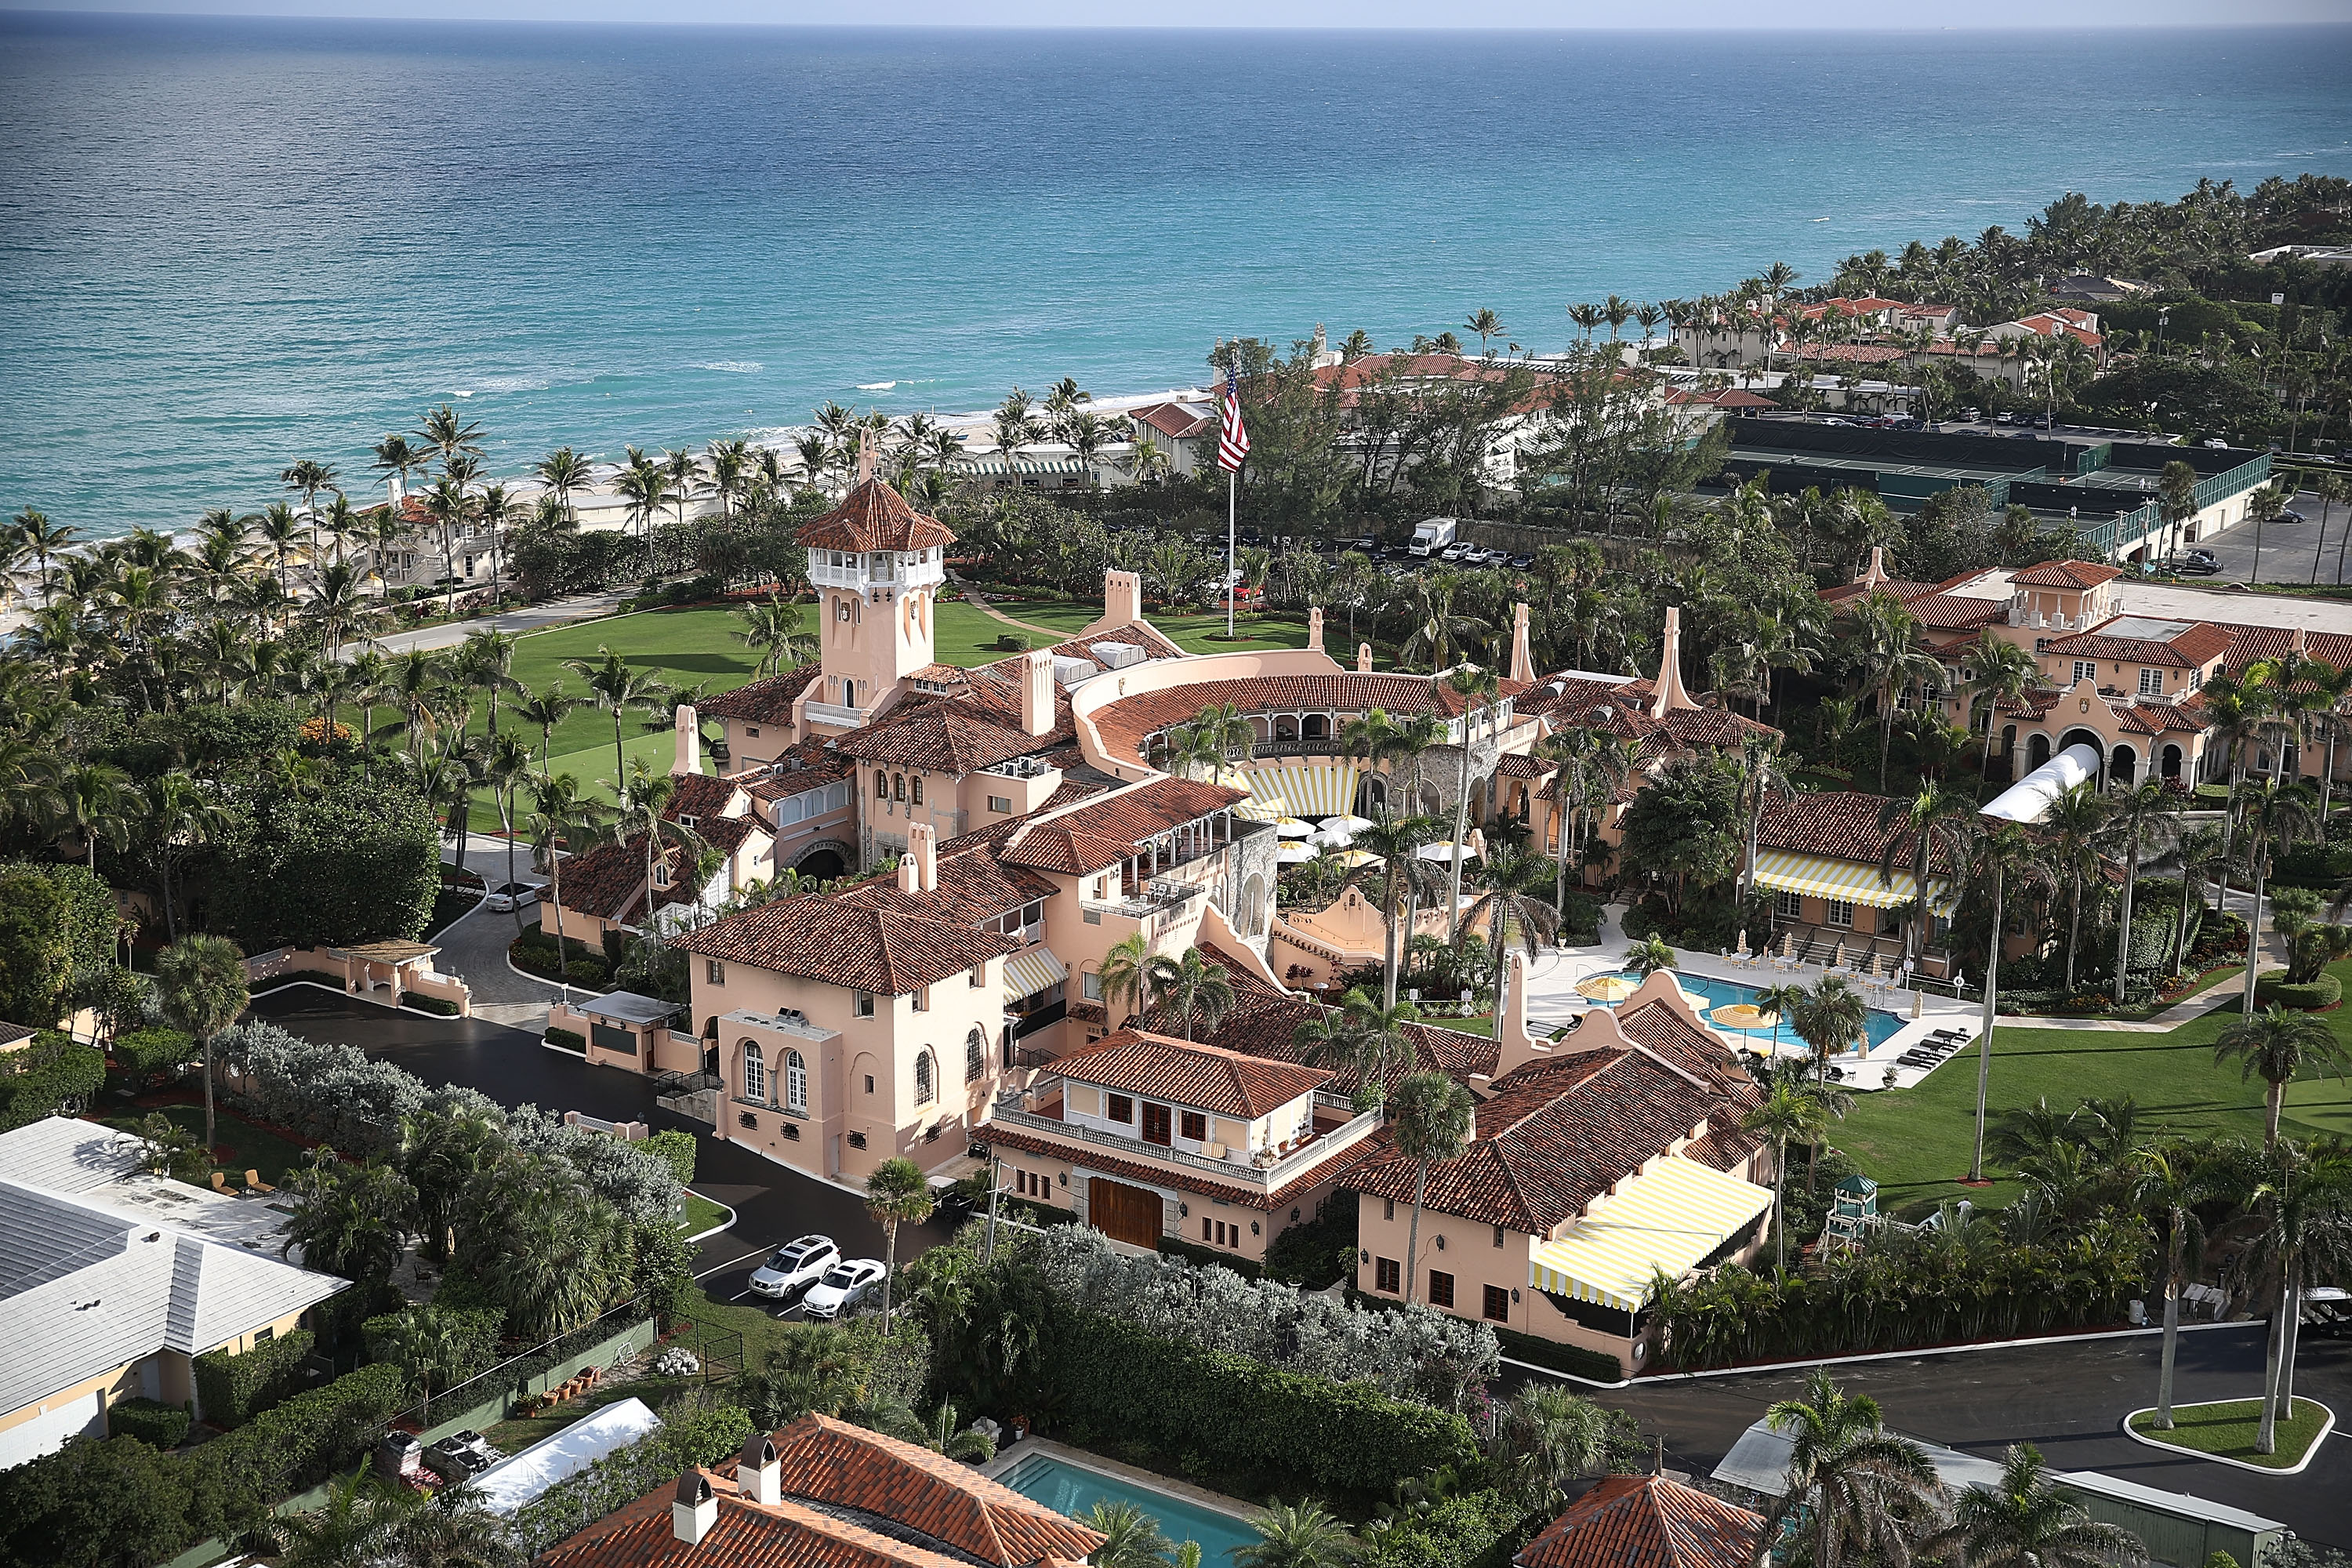 viral photo of uniformed marines at mar-a-lago was from nonpolitical event